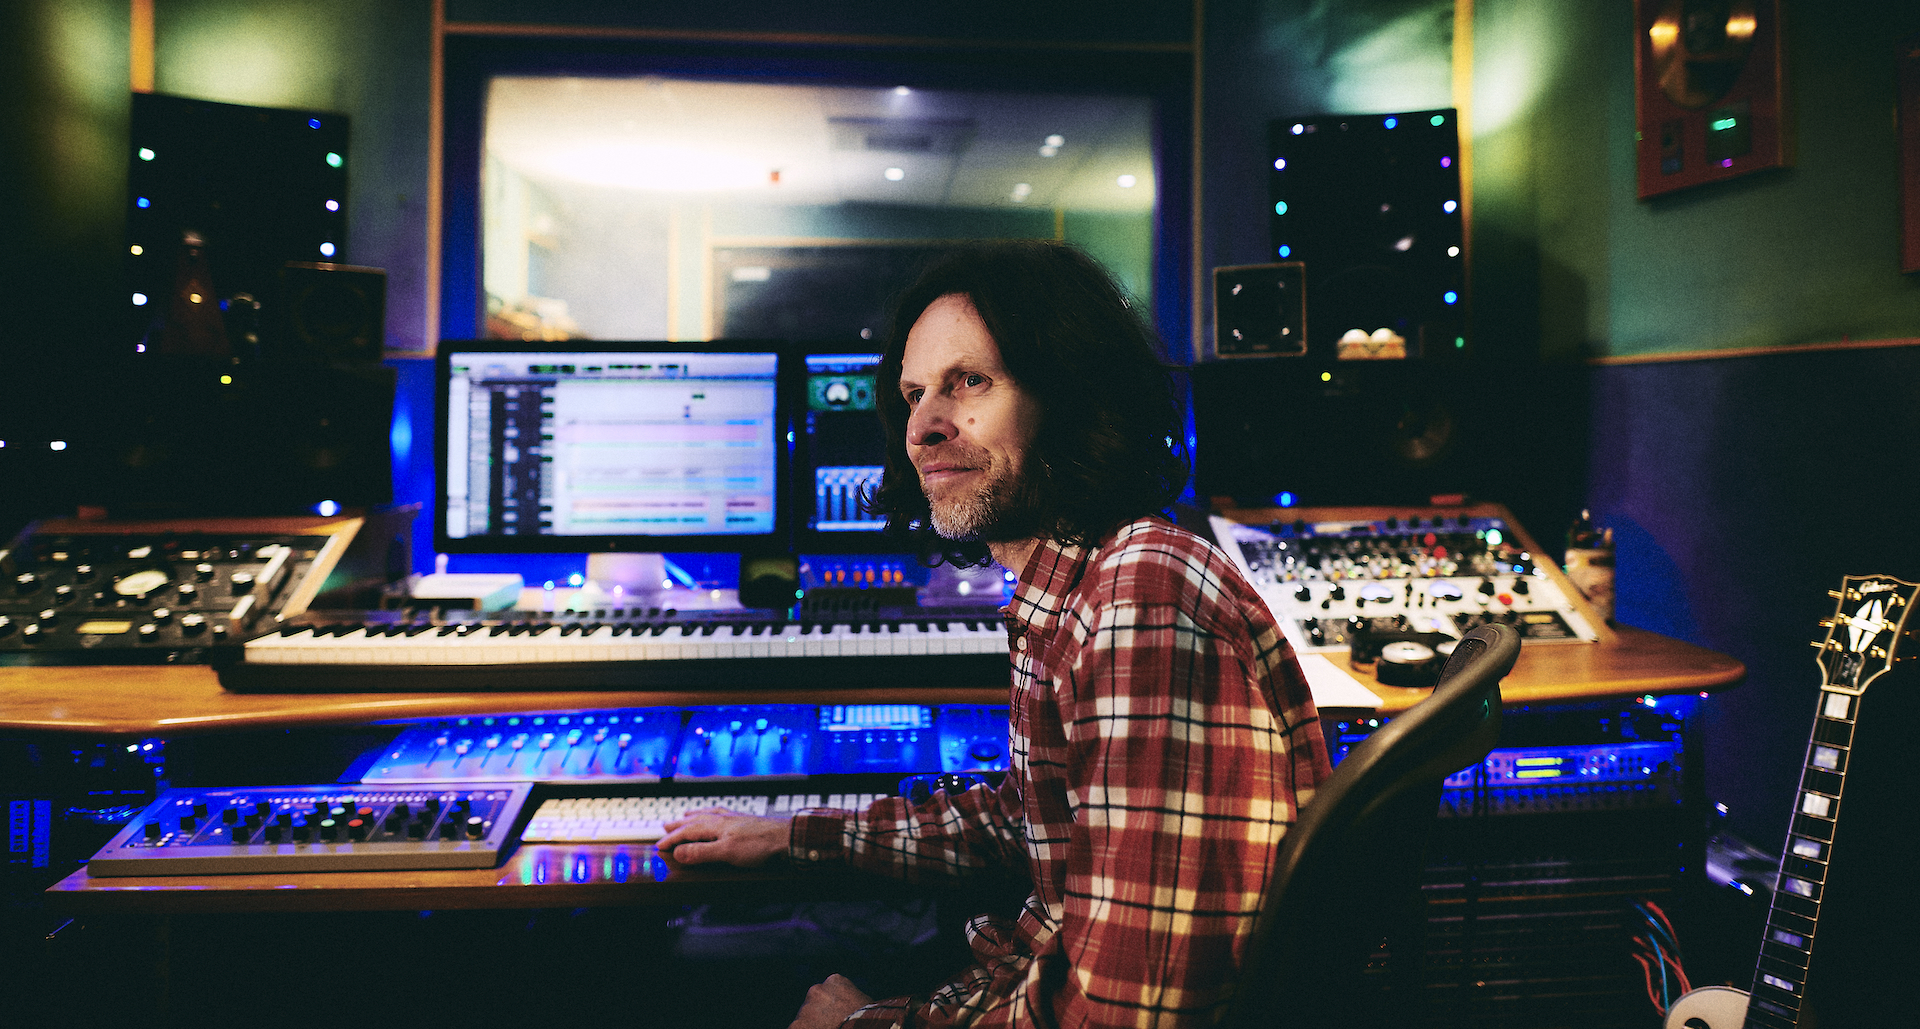 Blog - George Shilling | Mixing, Mastering, Cello